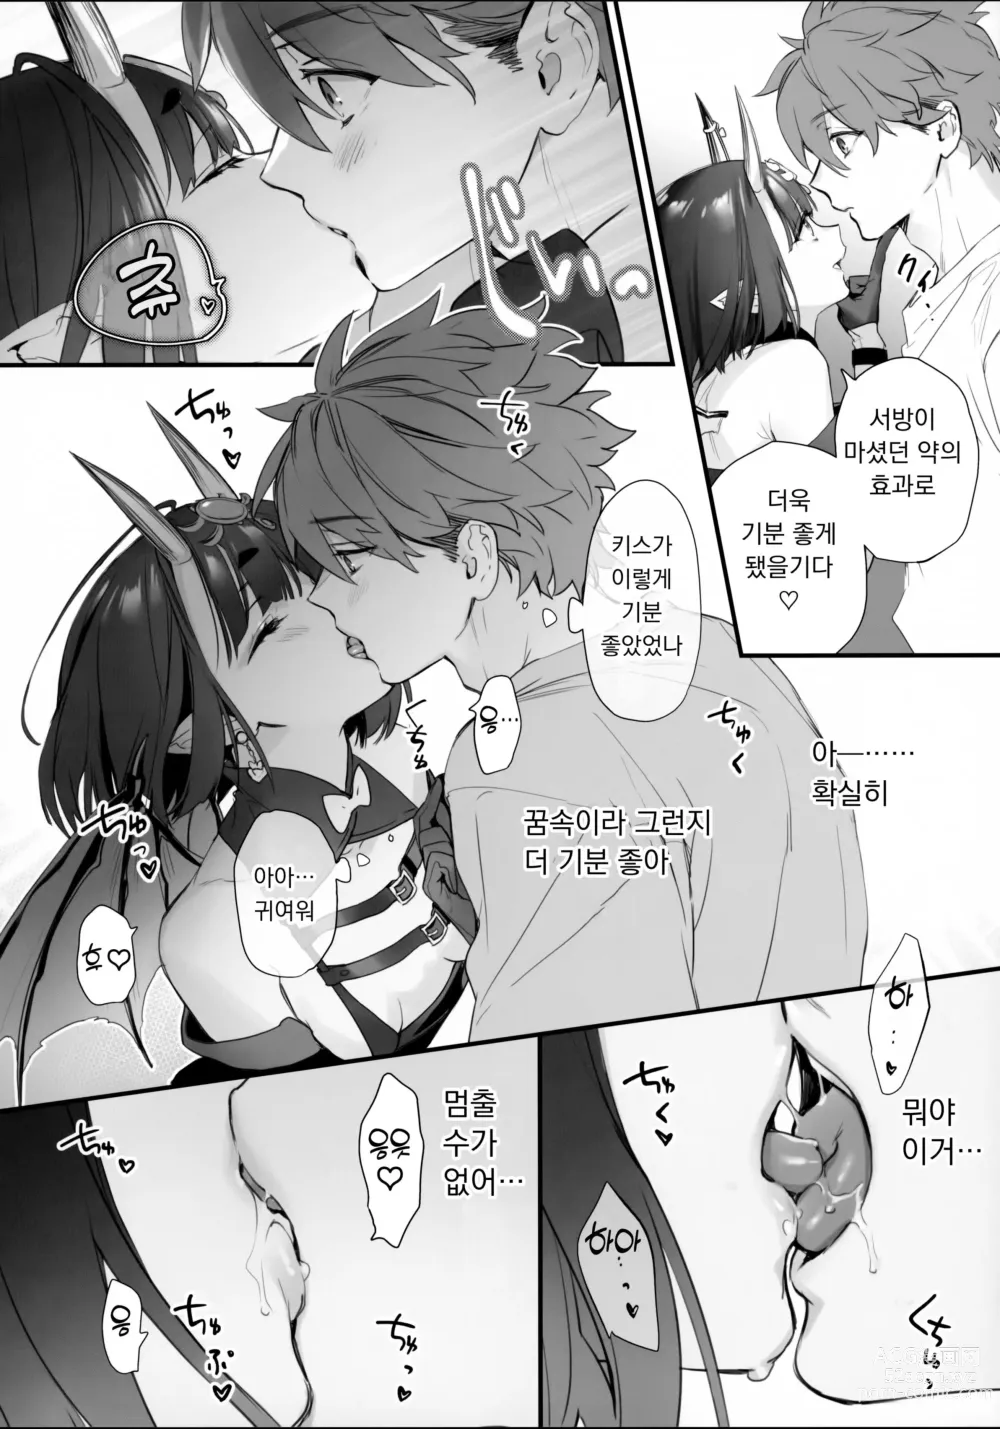 Page 6 of doujinshi 너는 서큐버스